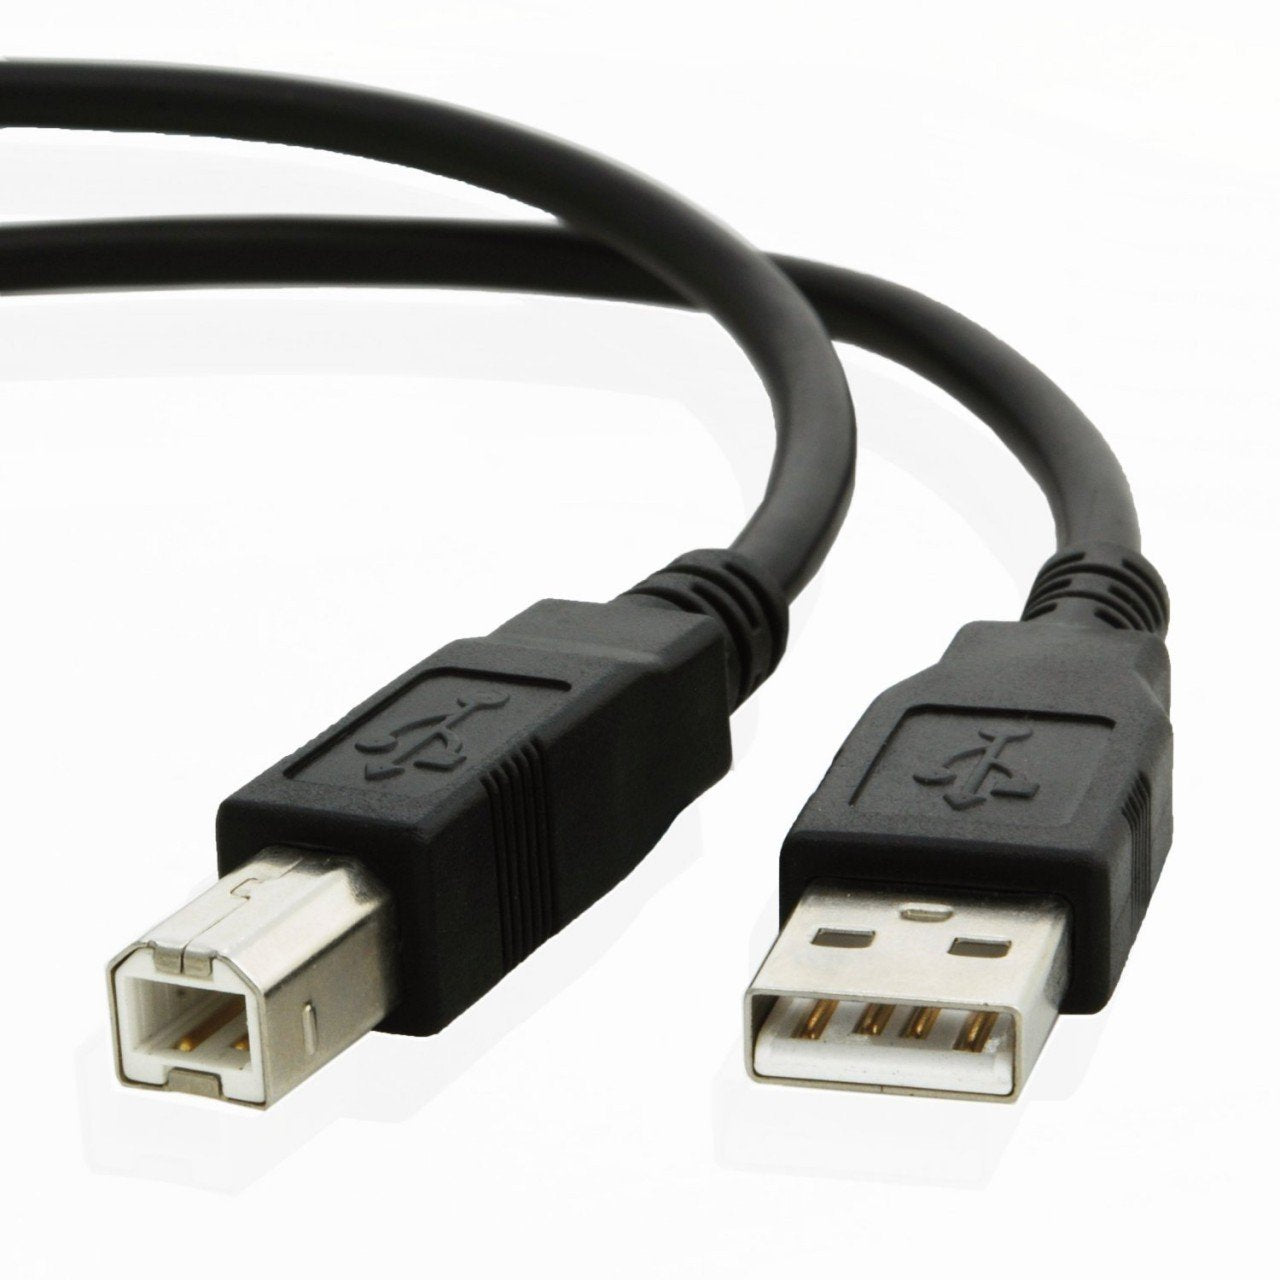 USB cable for Epson IMPACT FX-2190N